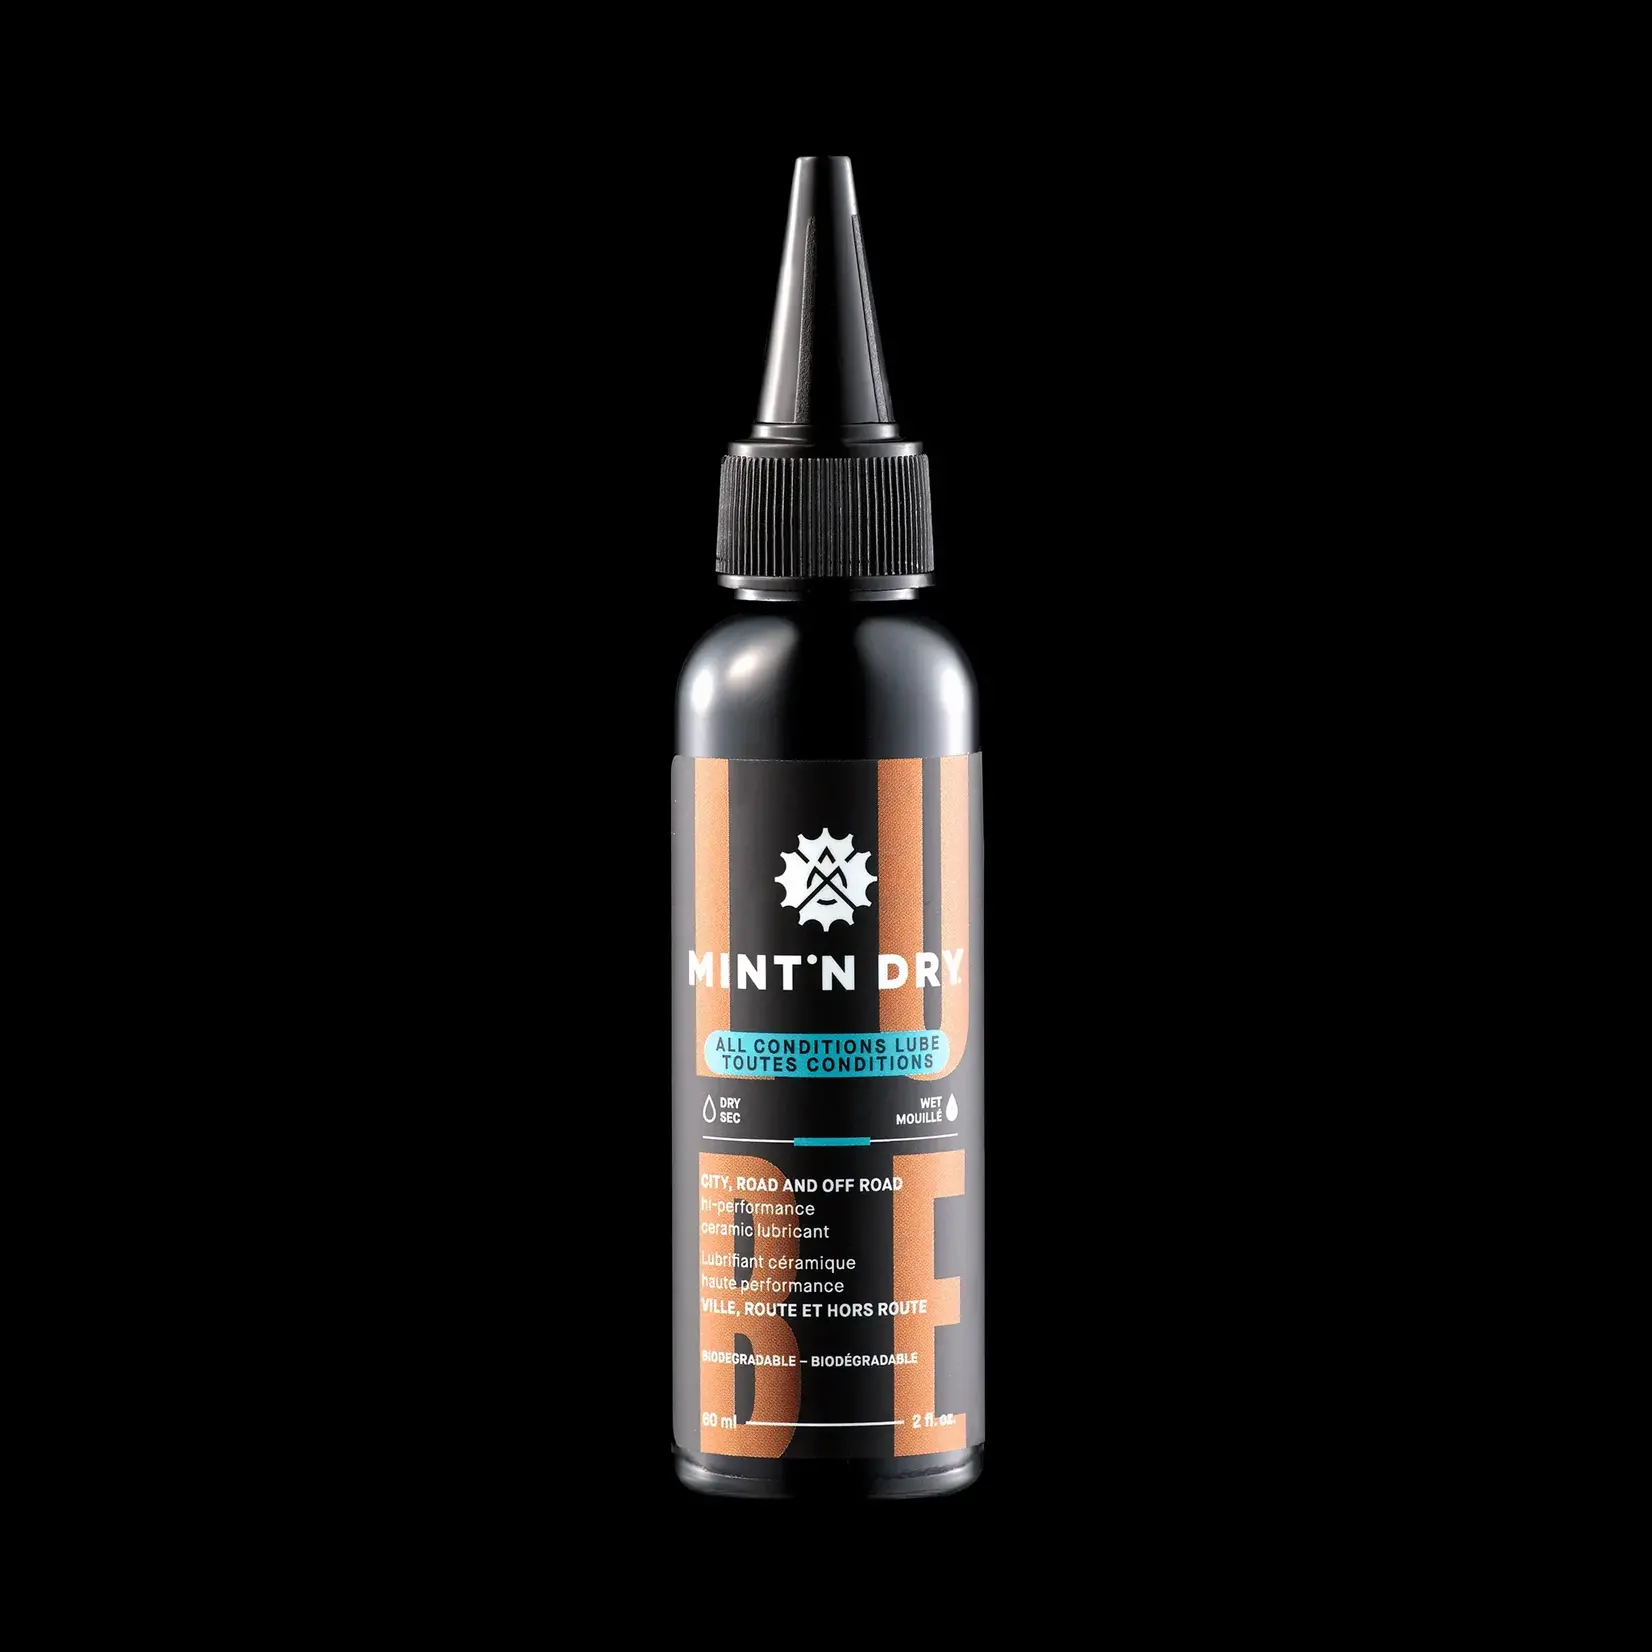 MINT'N DRY MINT'N DRY, Ceramic Lube, All Conditions, 60mL